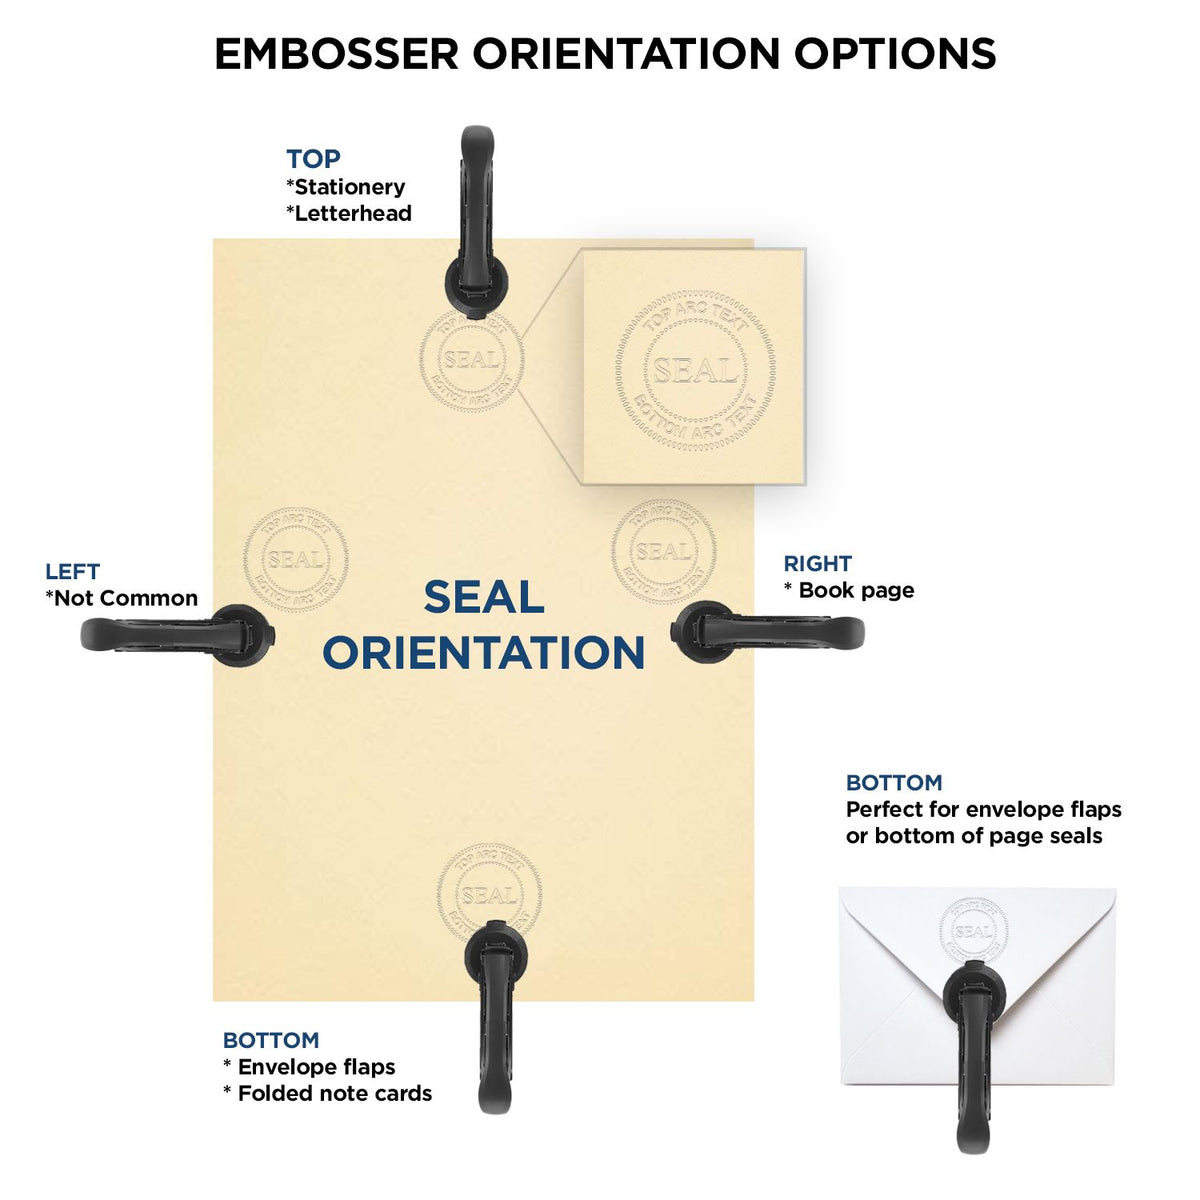 An infographic for the State of Oklahoma Long Reach Architectural Embossing Seal showing embosser orientation, this is showing examples of a top, bottom, right and left insert.